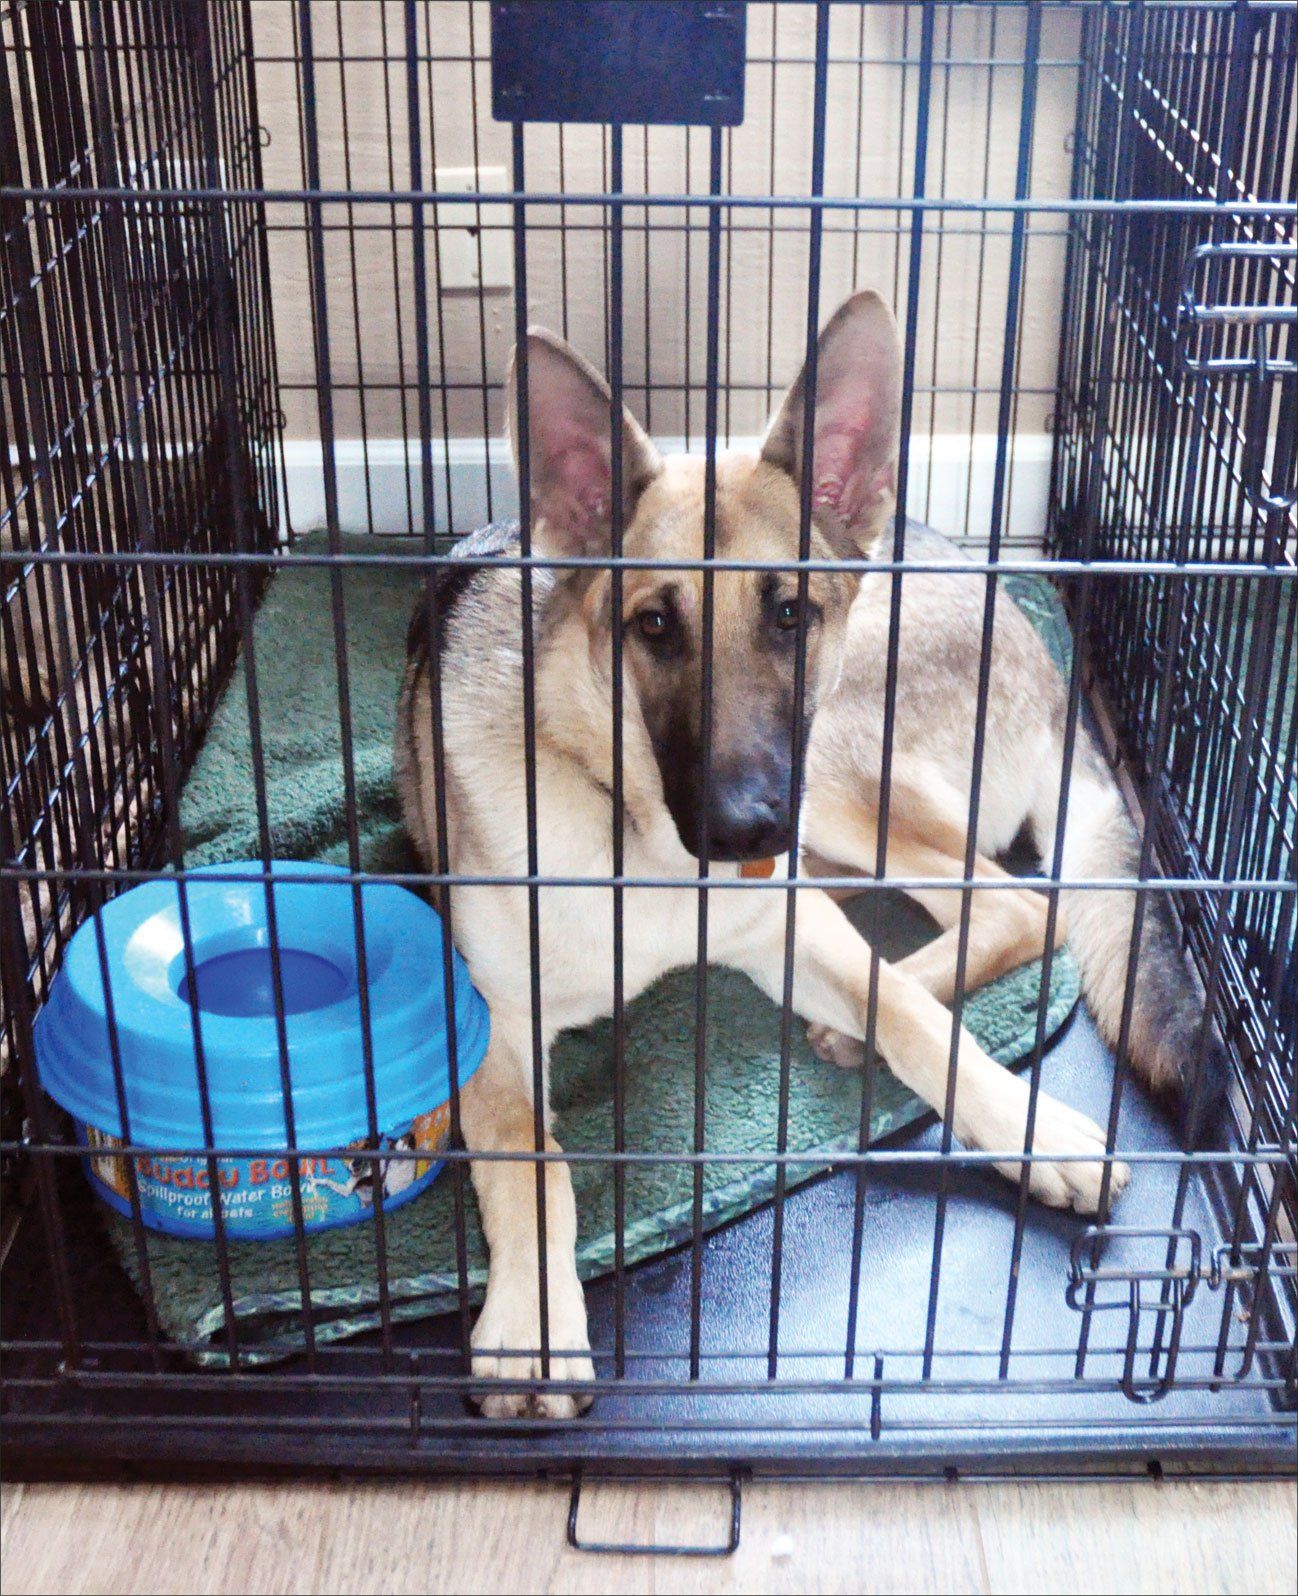 Crate Training To Keep Your Dog Content - Whole Dog Journal